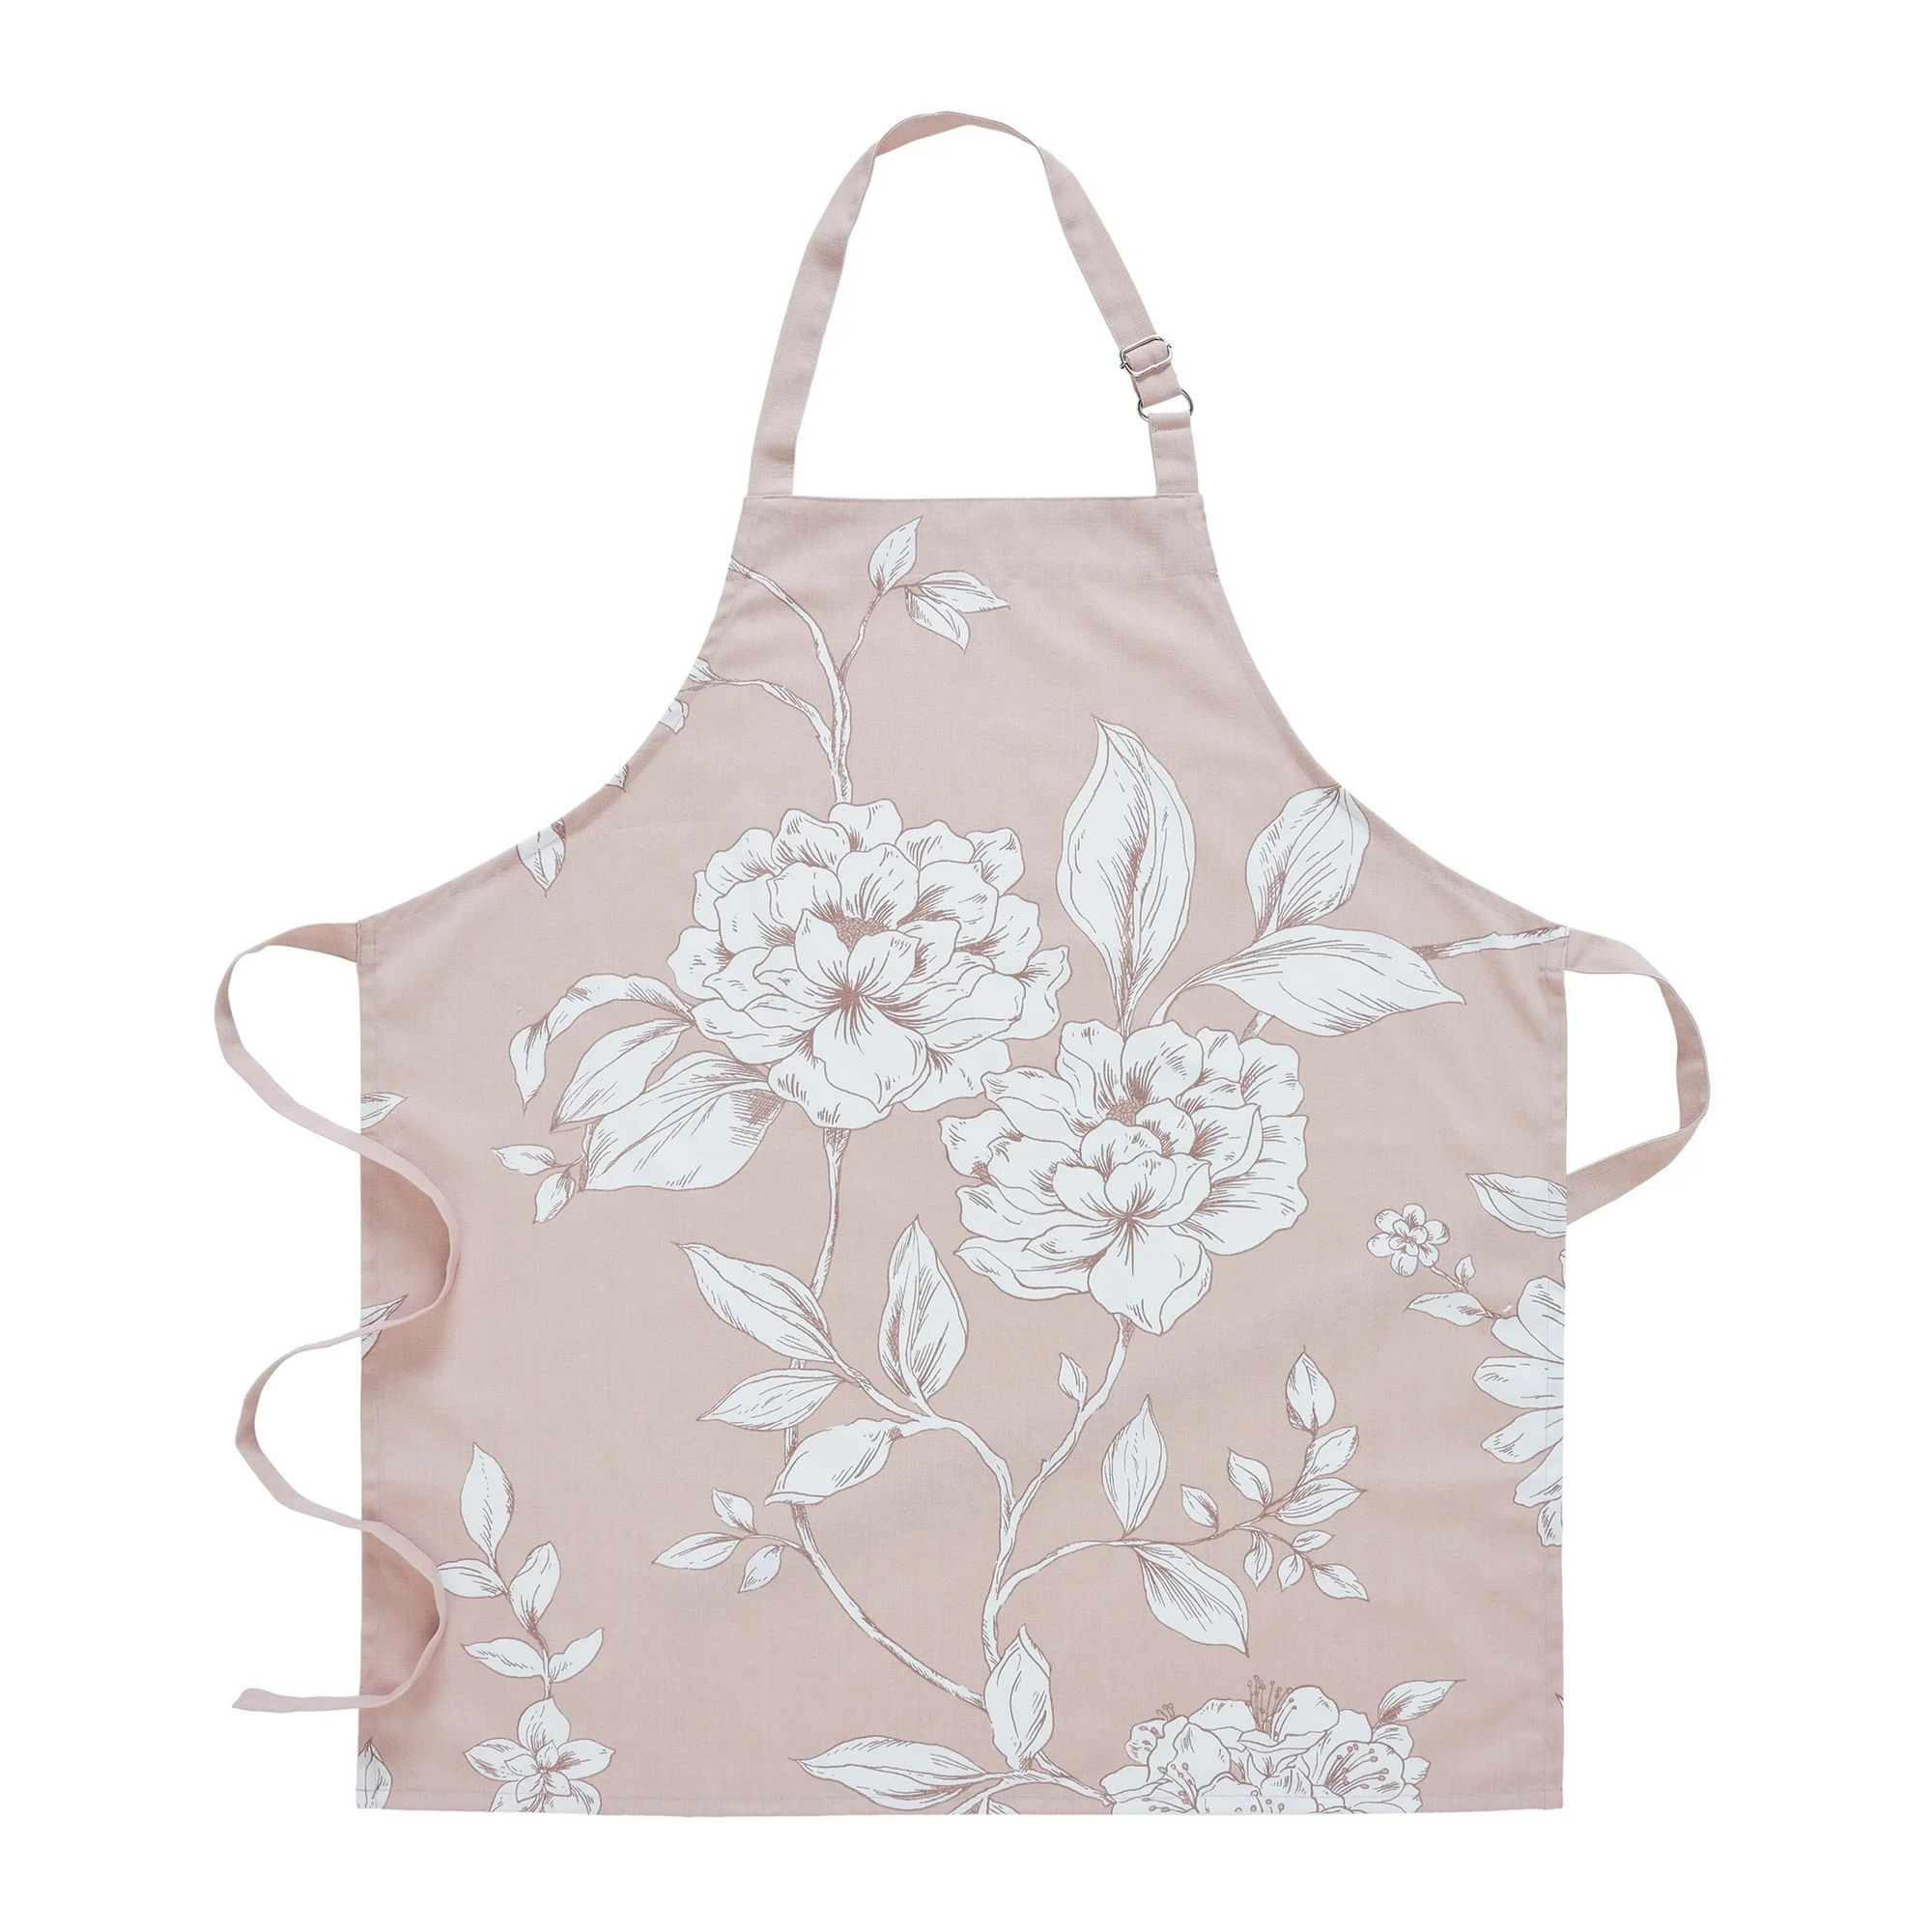 My Texas House Polyester/Cotton 30" x 34" Oversized Floral Printed Apron, Blush | Walmart (US)